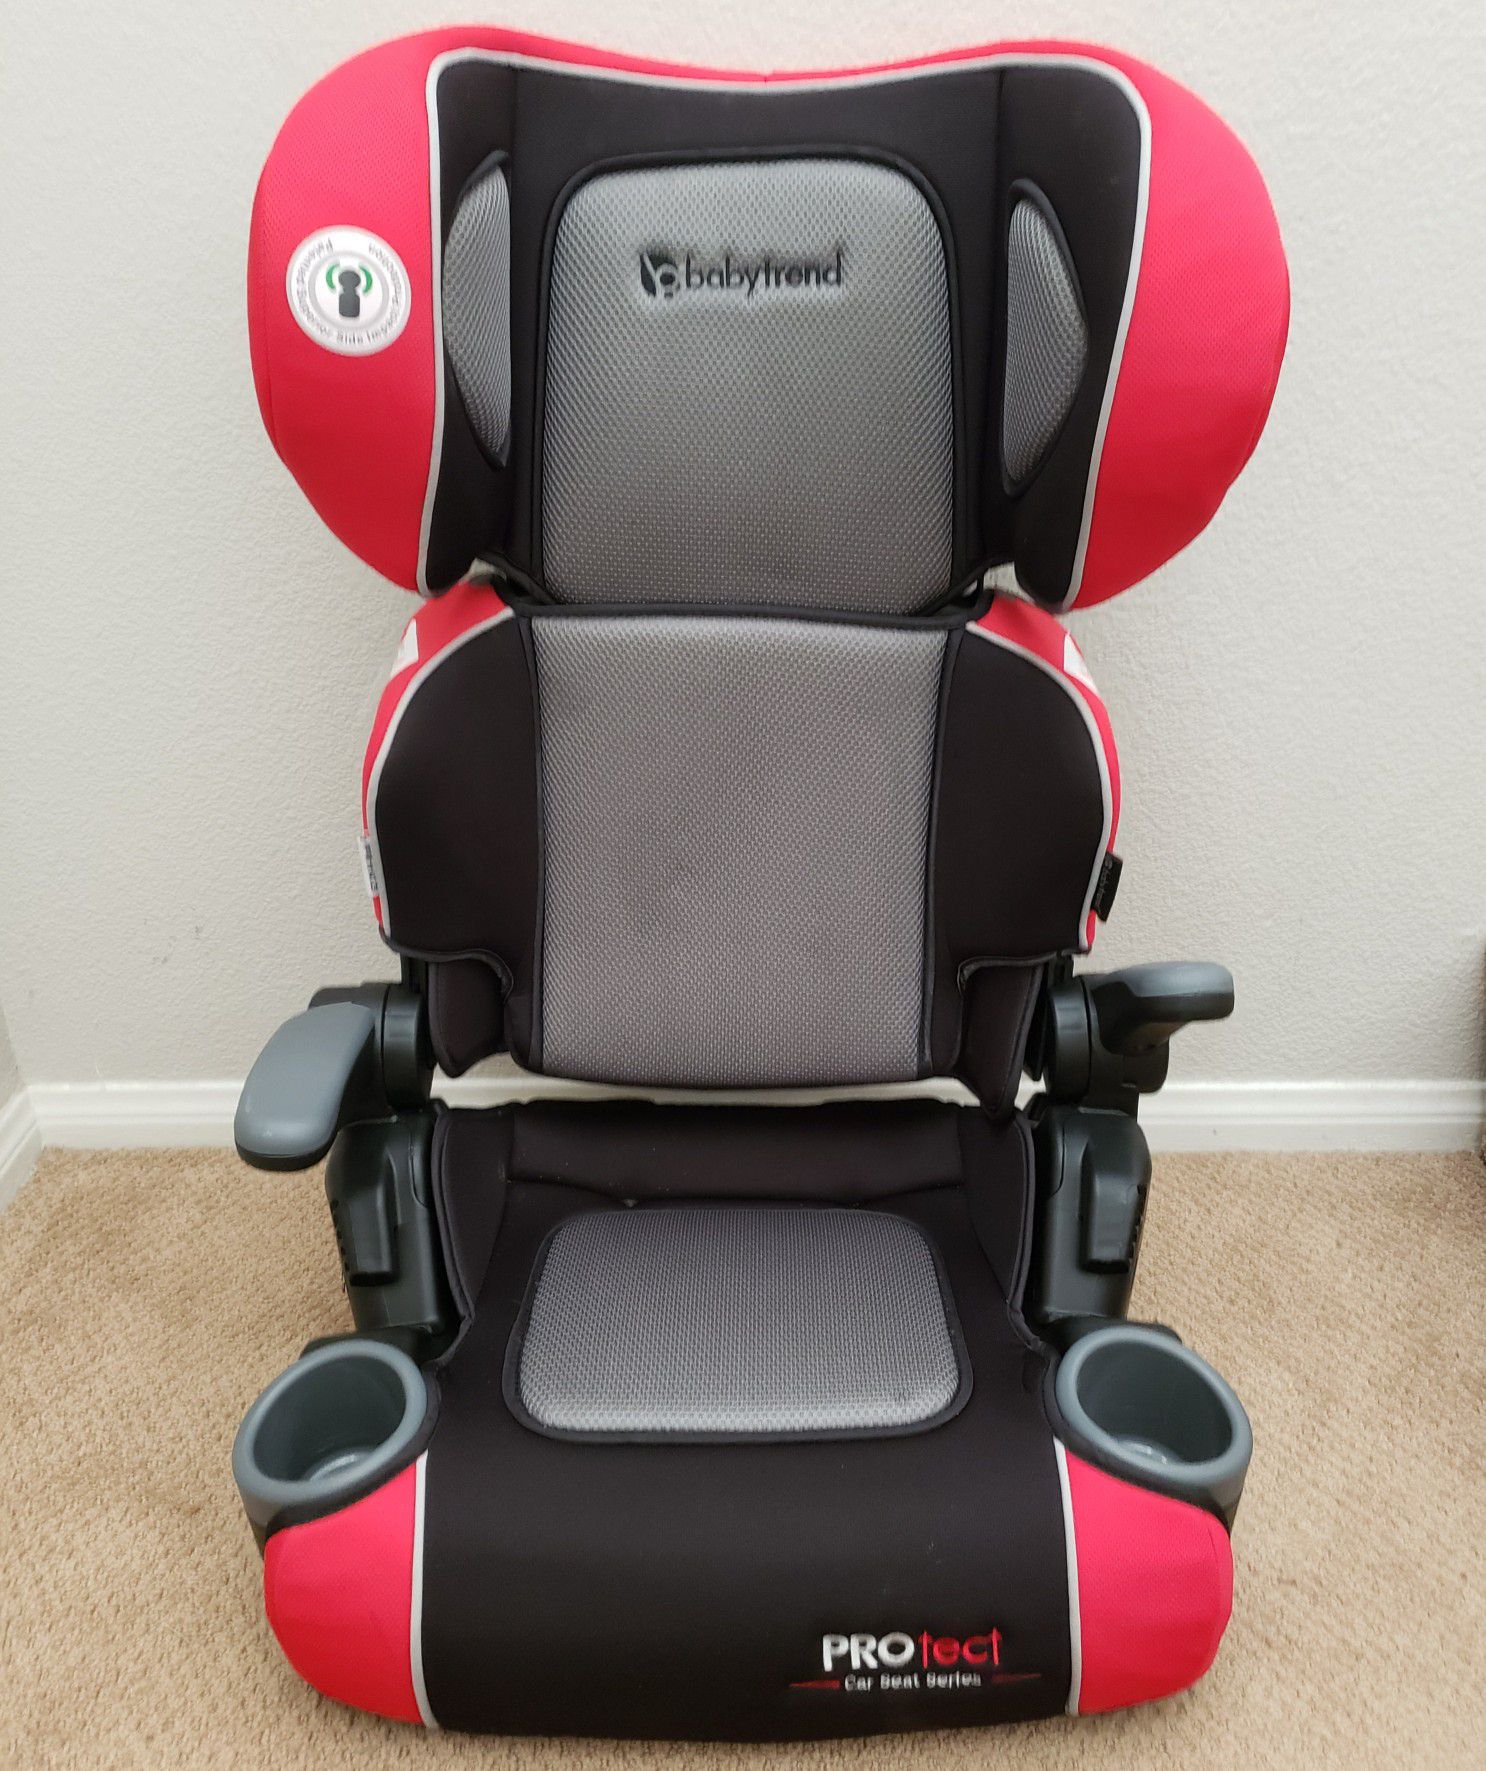 Babytrend PROtect Car Seat Series